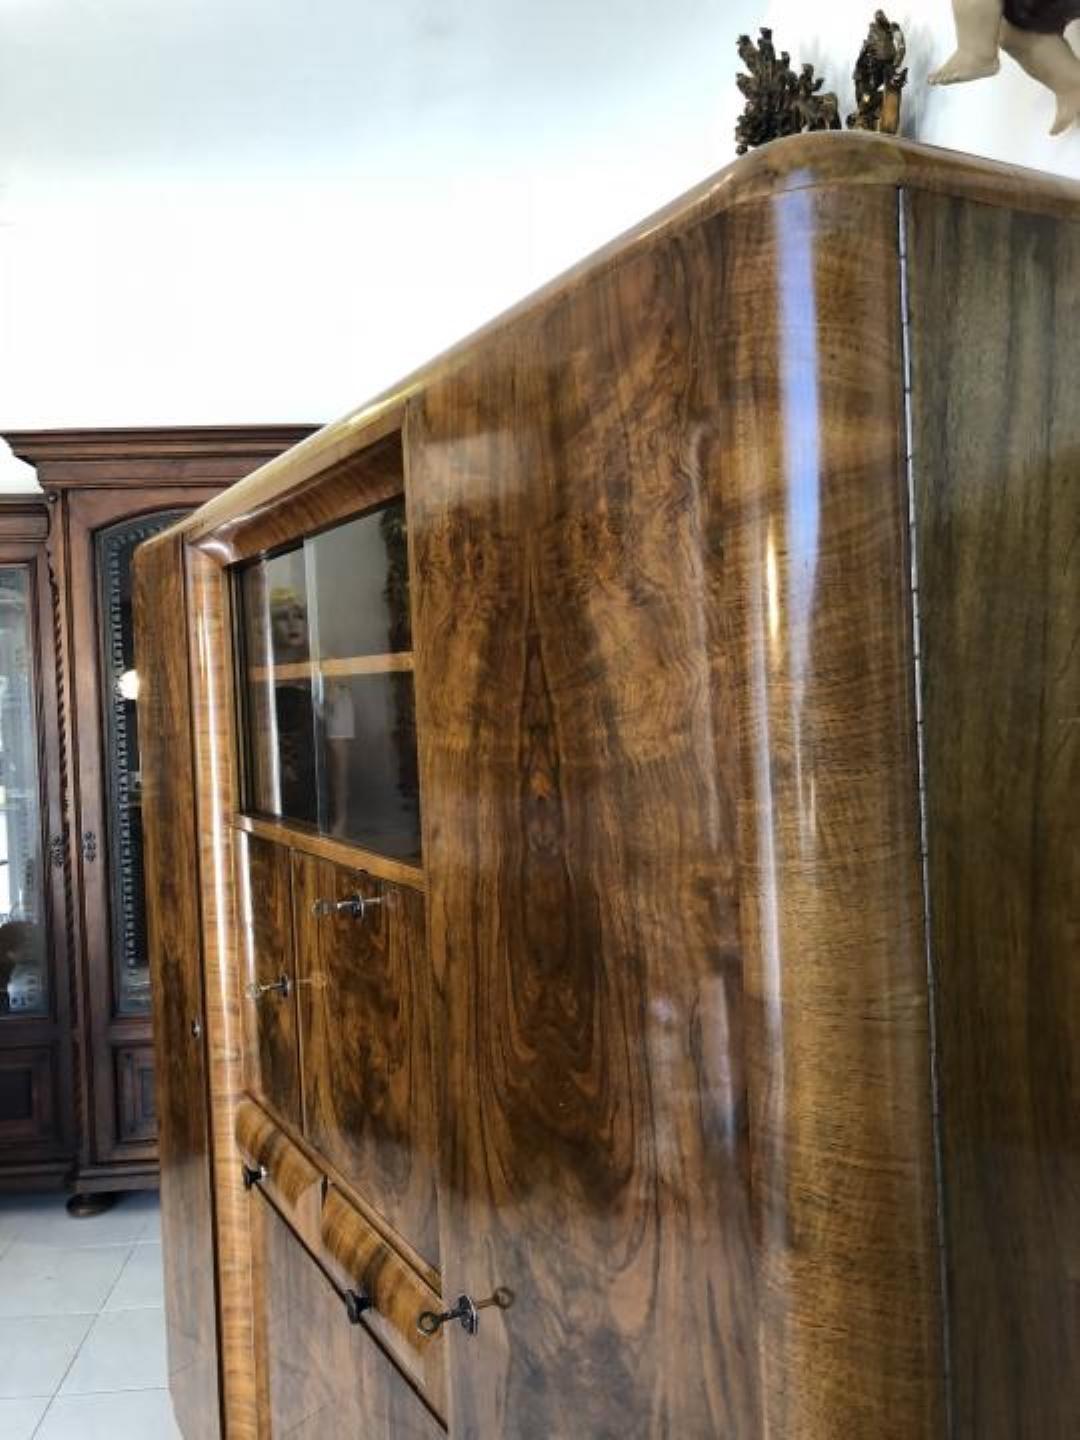 Burl wood Art Deco style cabinet made of Caucasian walnut with a stunning wooden grain. Features plenty of storage space behind multiple doors and a showcase compartment with glass sliding doors on top.
Finished with a high gloss patina finish and